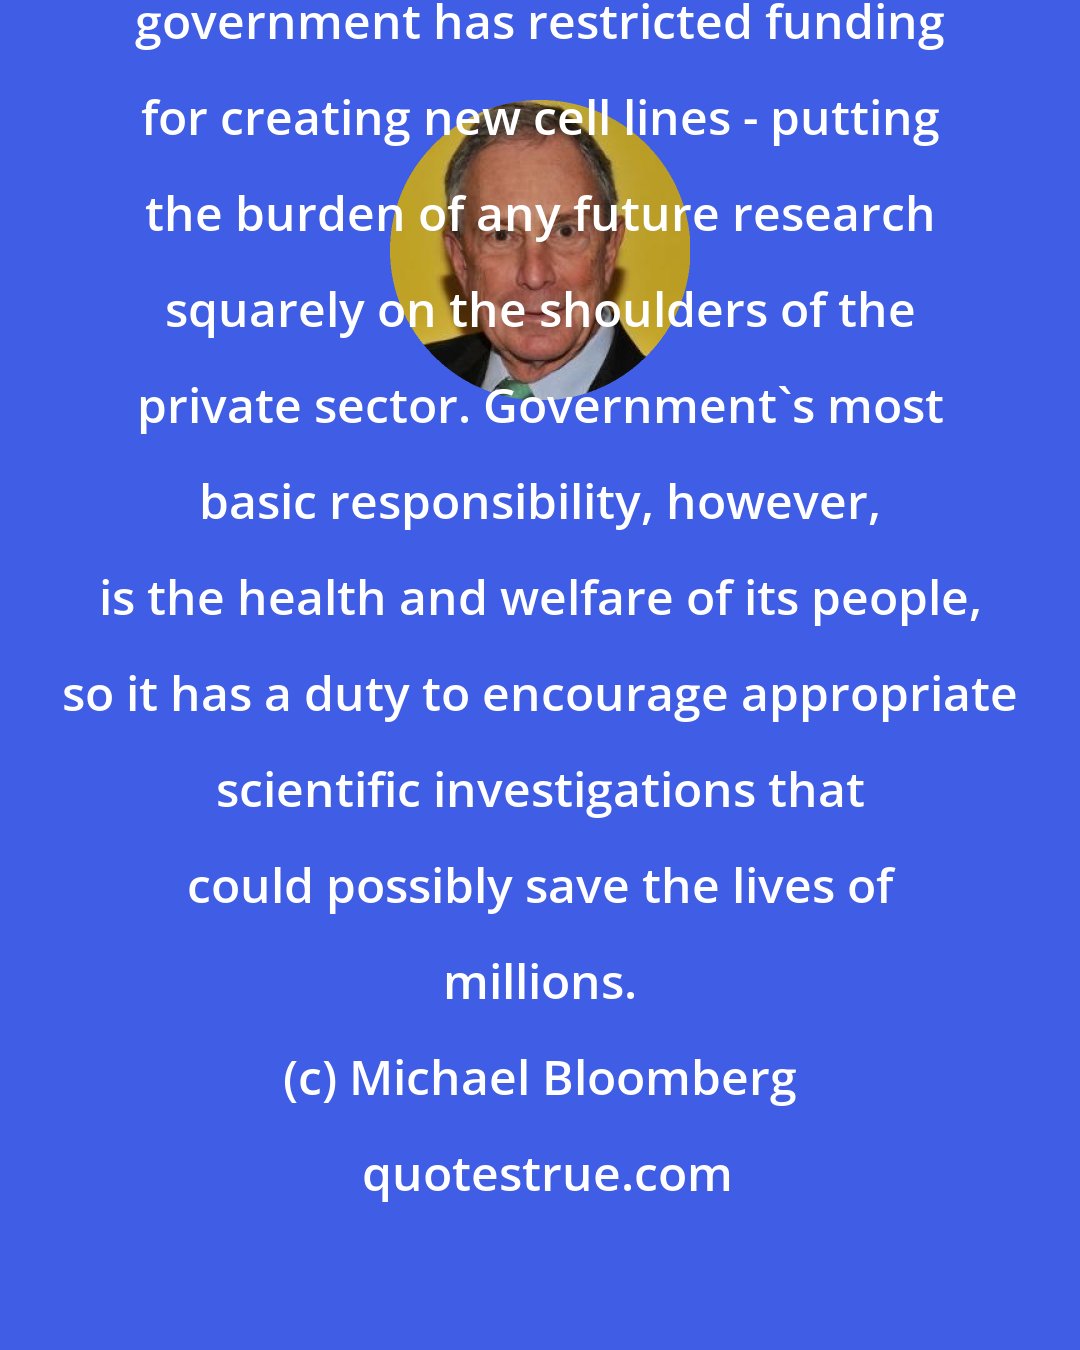 Michael Bloomberg: Despite its potential, the federal government has restricted funding for creating new cell lines - putting the burden of any future research squarely on the shoulders of the private sector. Government's most basic responsibility, however, is the health and welfare of its people, so it has a duty to encourage appropriate scientific investigations that could possibly save the lives of millions.